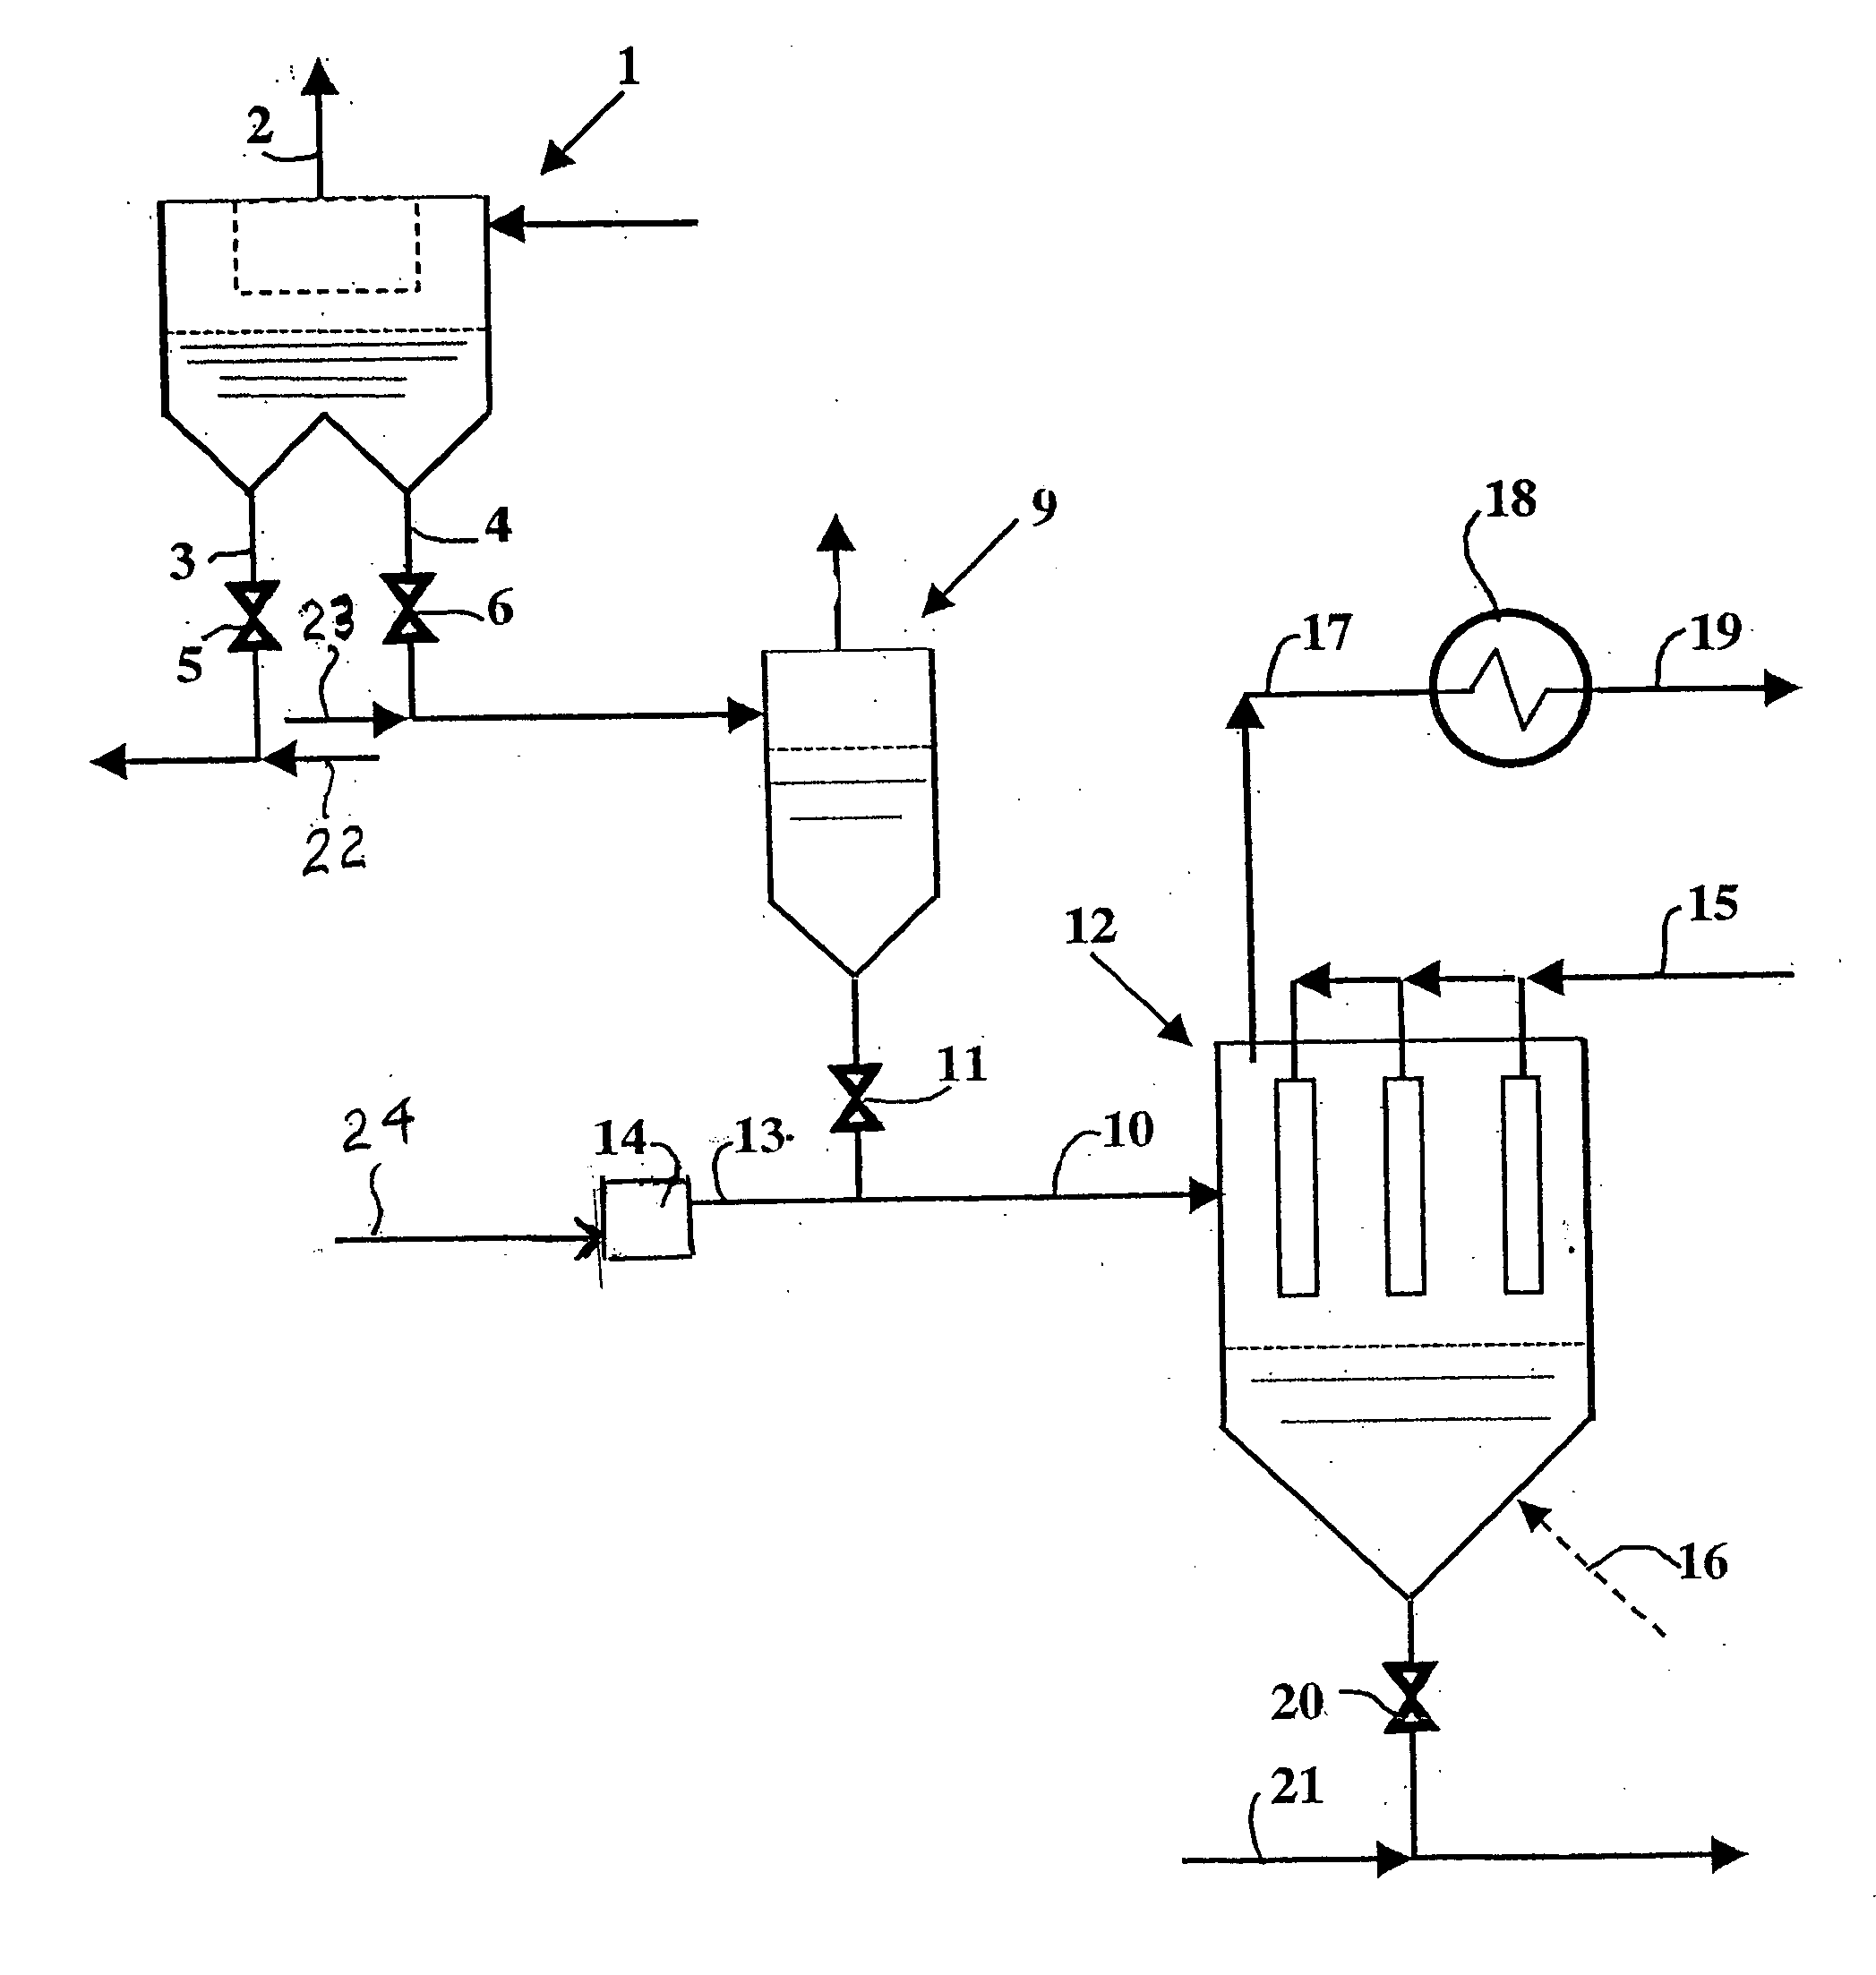 Process and device intended for regeneration of used absorbents from thermal generator fumes treatment